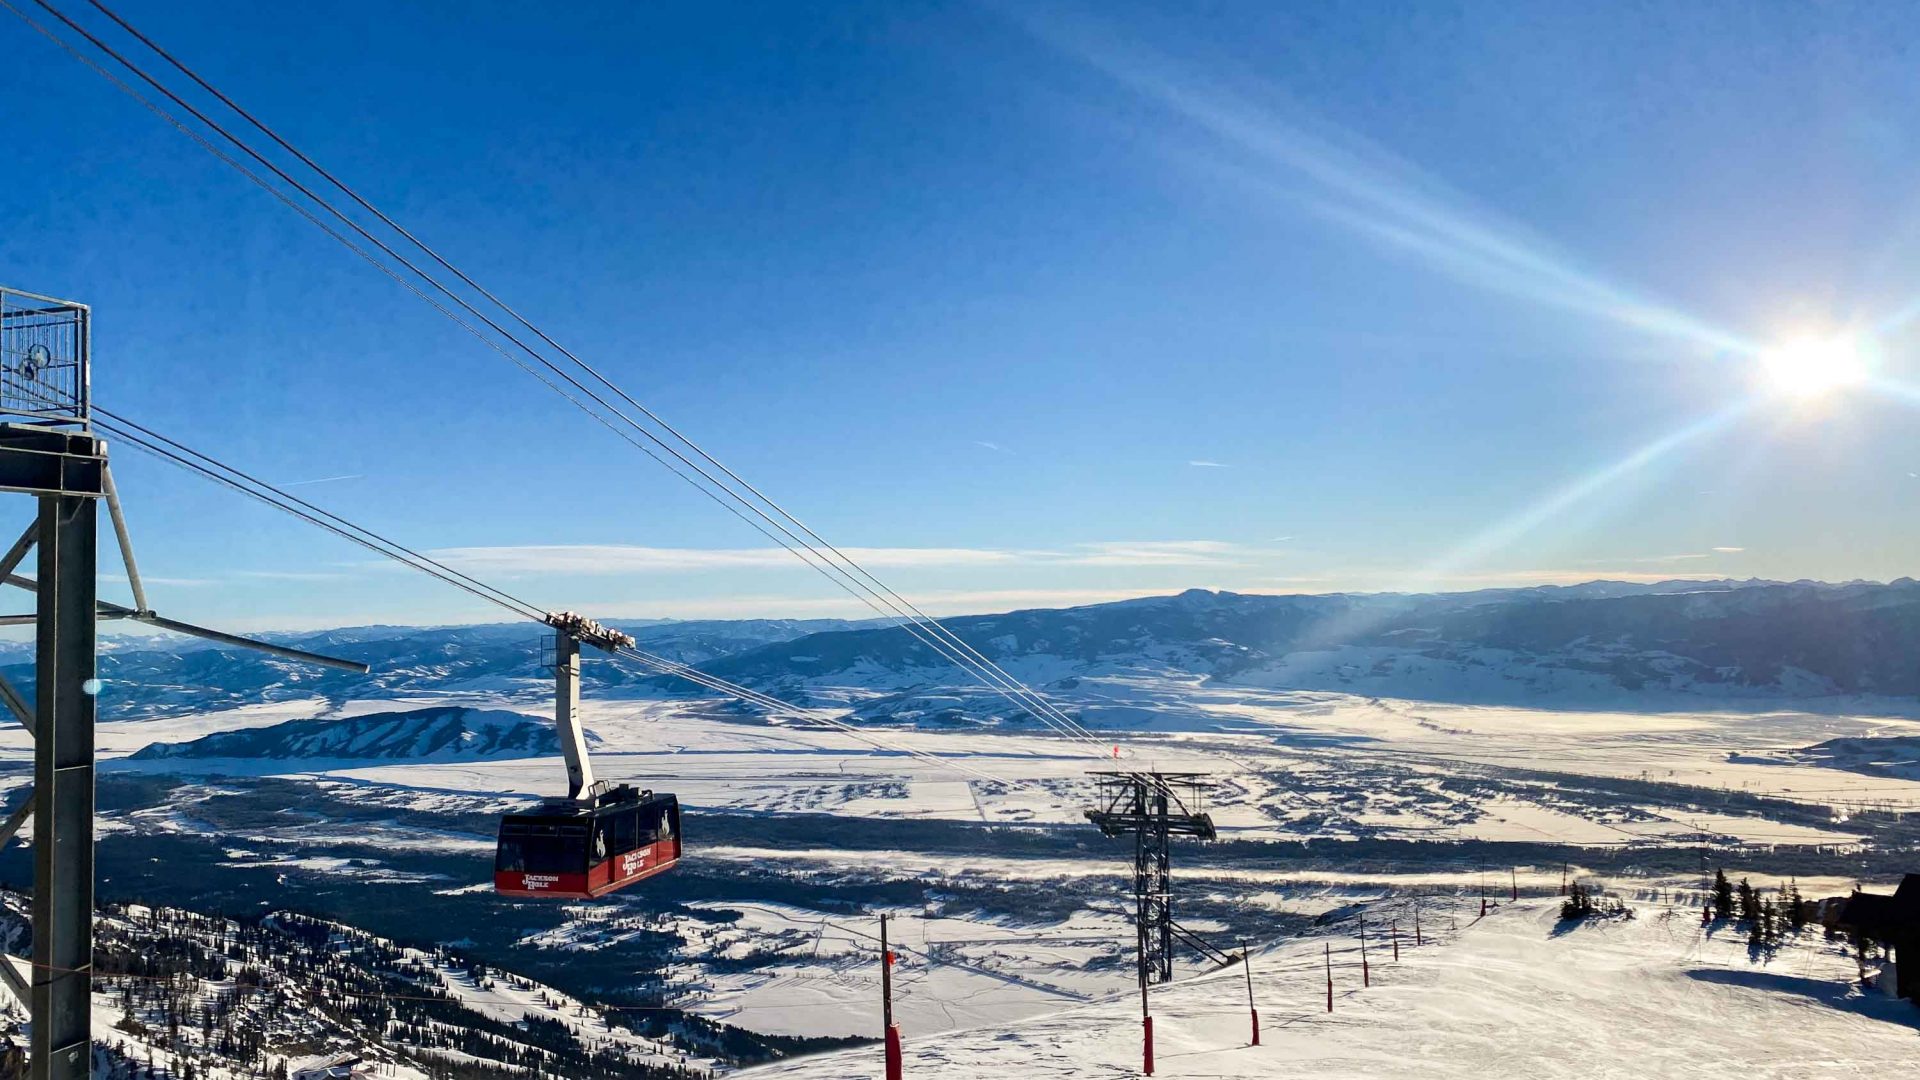 A chairlift on a snowy mountain with the sun low in the sky.